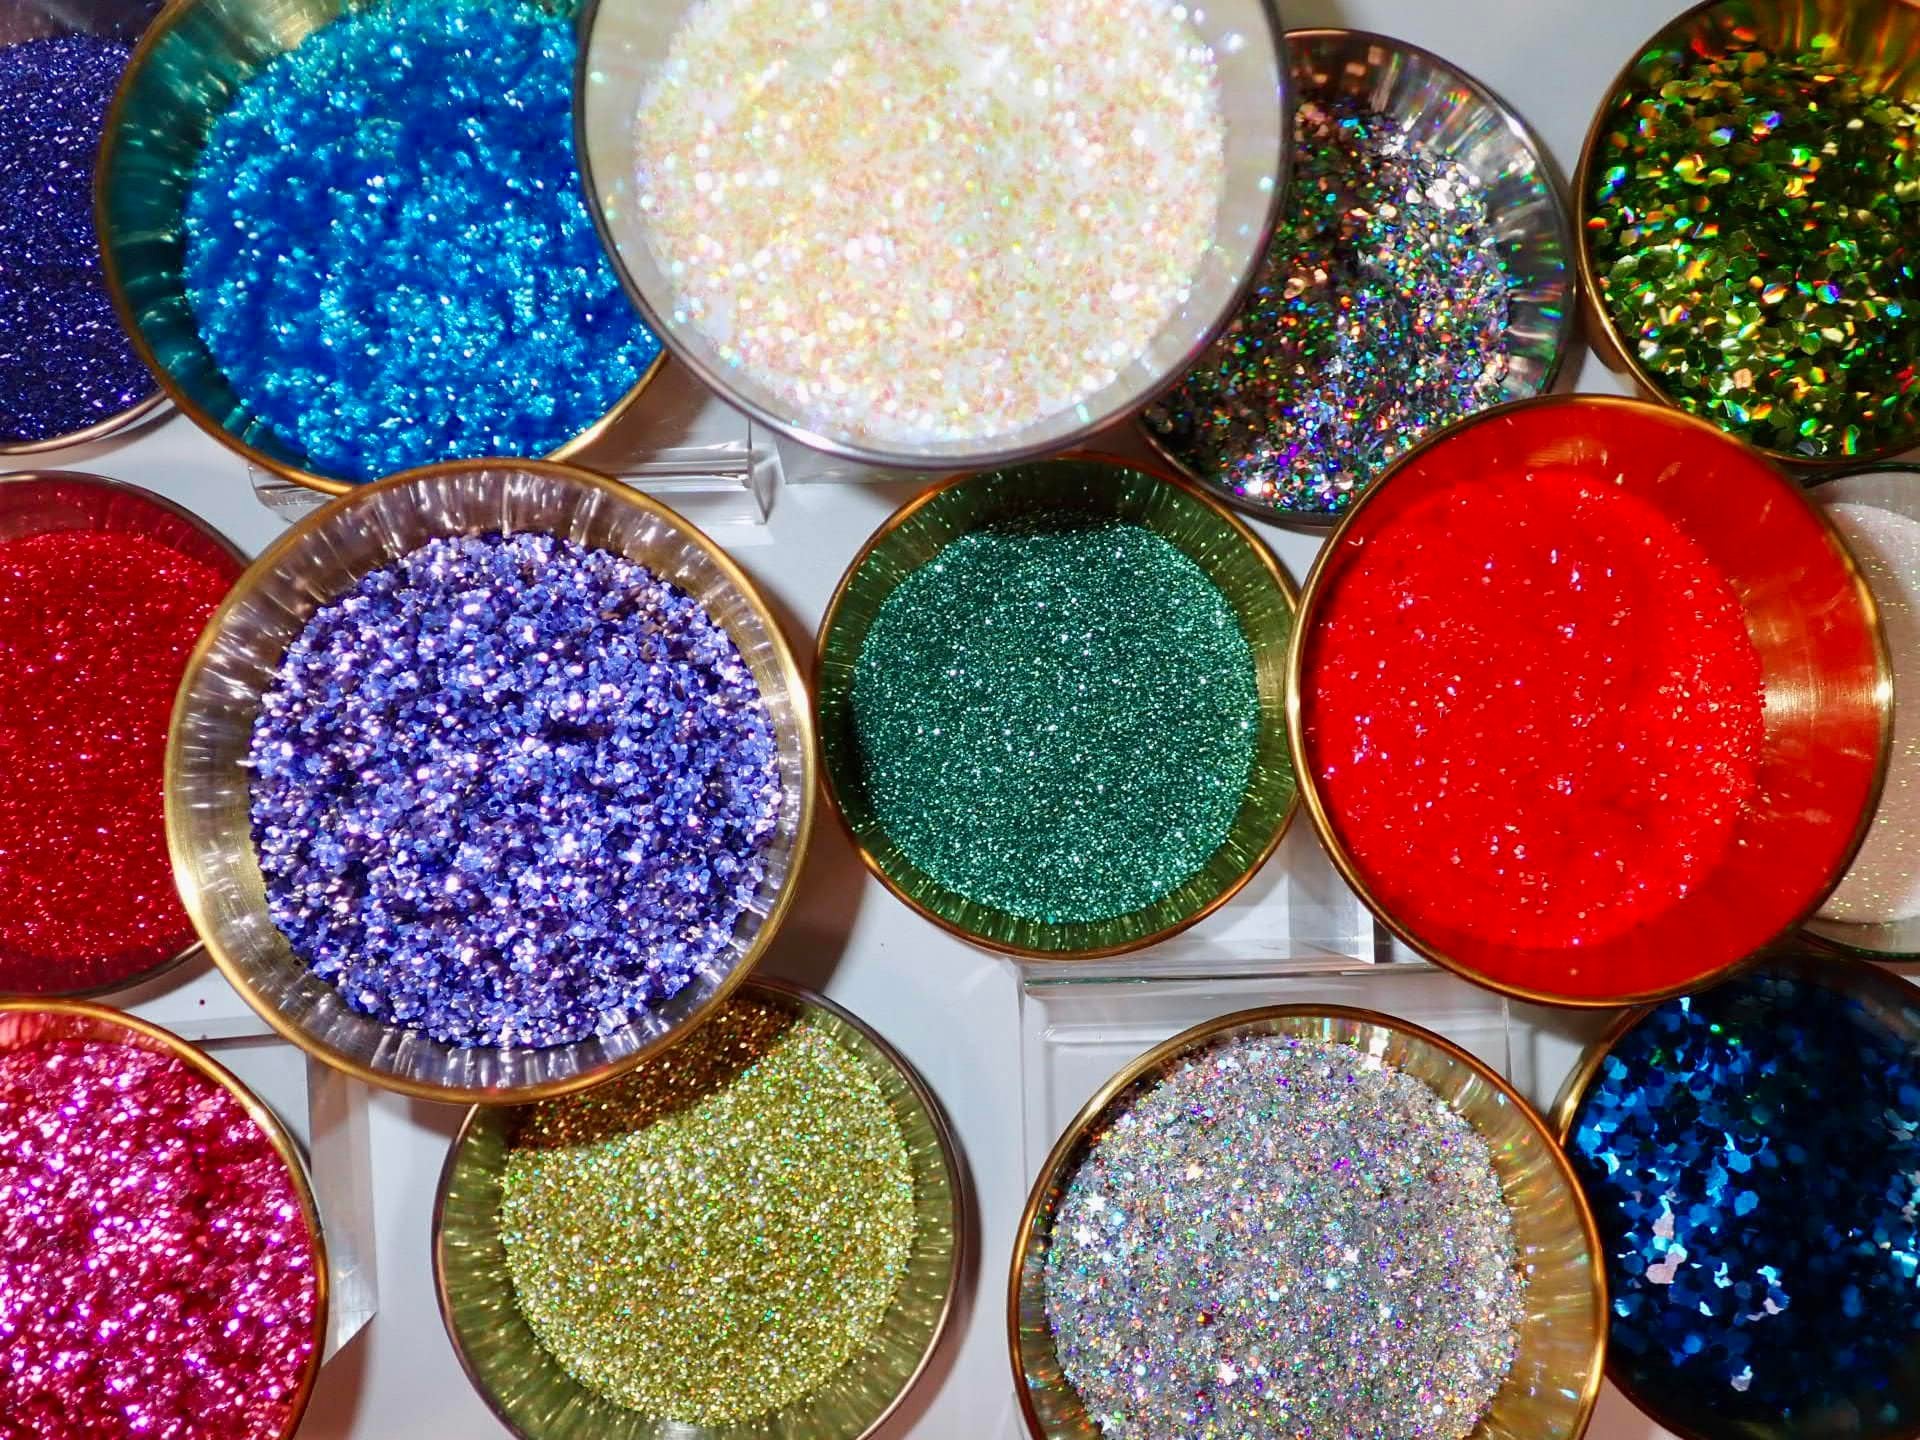 Load video: Who says biodegradable glitter can’t dazzle as hard as traditional plastic glitters?! We’re so proud to offer some of the prettiest bio glitters and glitter mixed available at latchkeylusters.com. ✨🌟💫